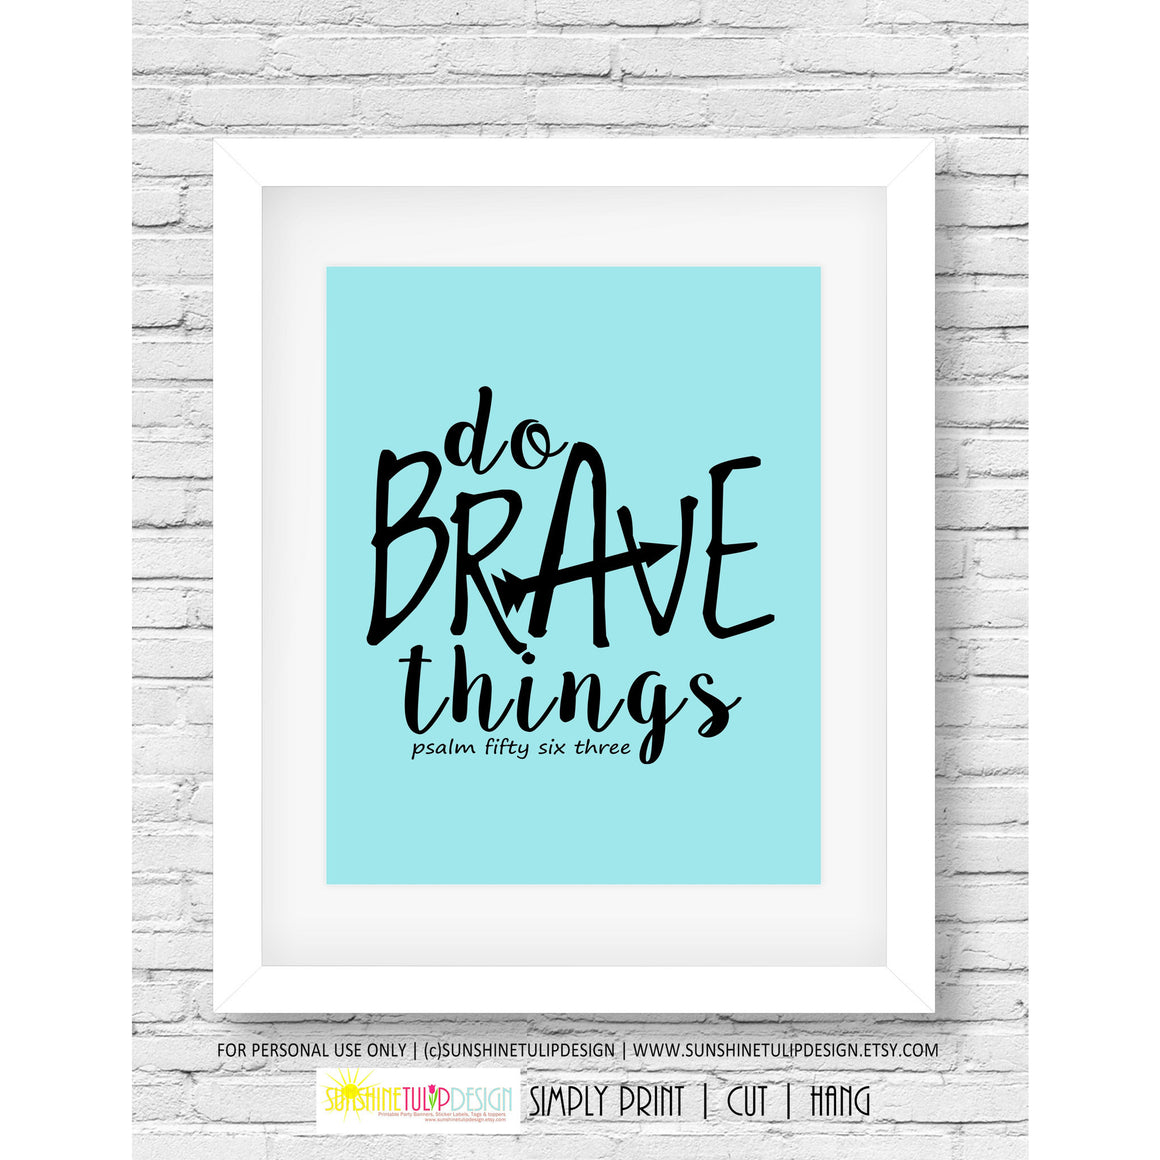 Printable Scripture Art, Wall Decor, Print Art, Do BRAVE Things, Words of Encouragement Wall Sign by SUNSHINETULIPDESIGN - Sunshinetulipdesign - 1